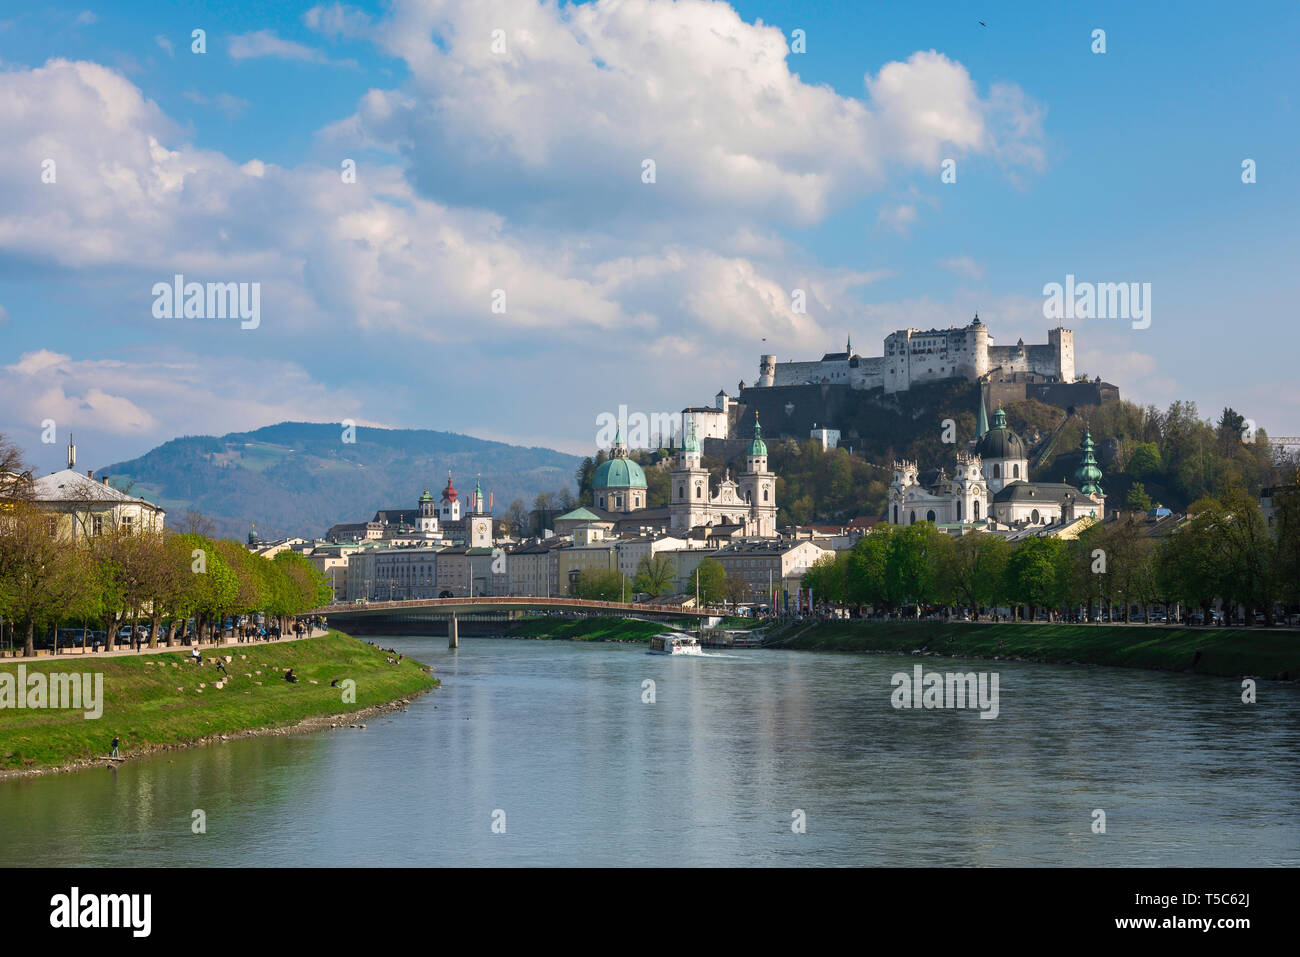 Salzburger Land, view of the cathedral, old town churches and the hill-top castle (Festung Hohensalzburg) in the city of Salzburg, Austria. Stock Photo